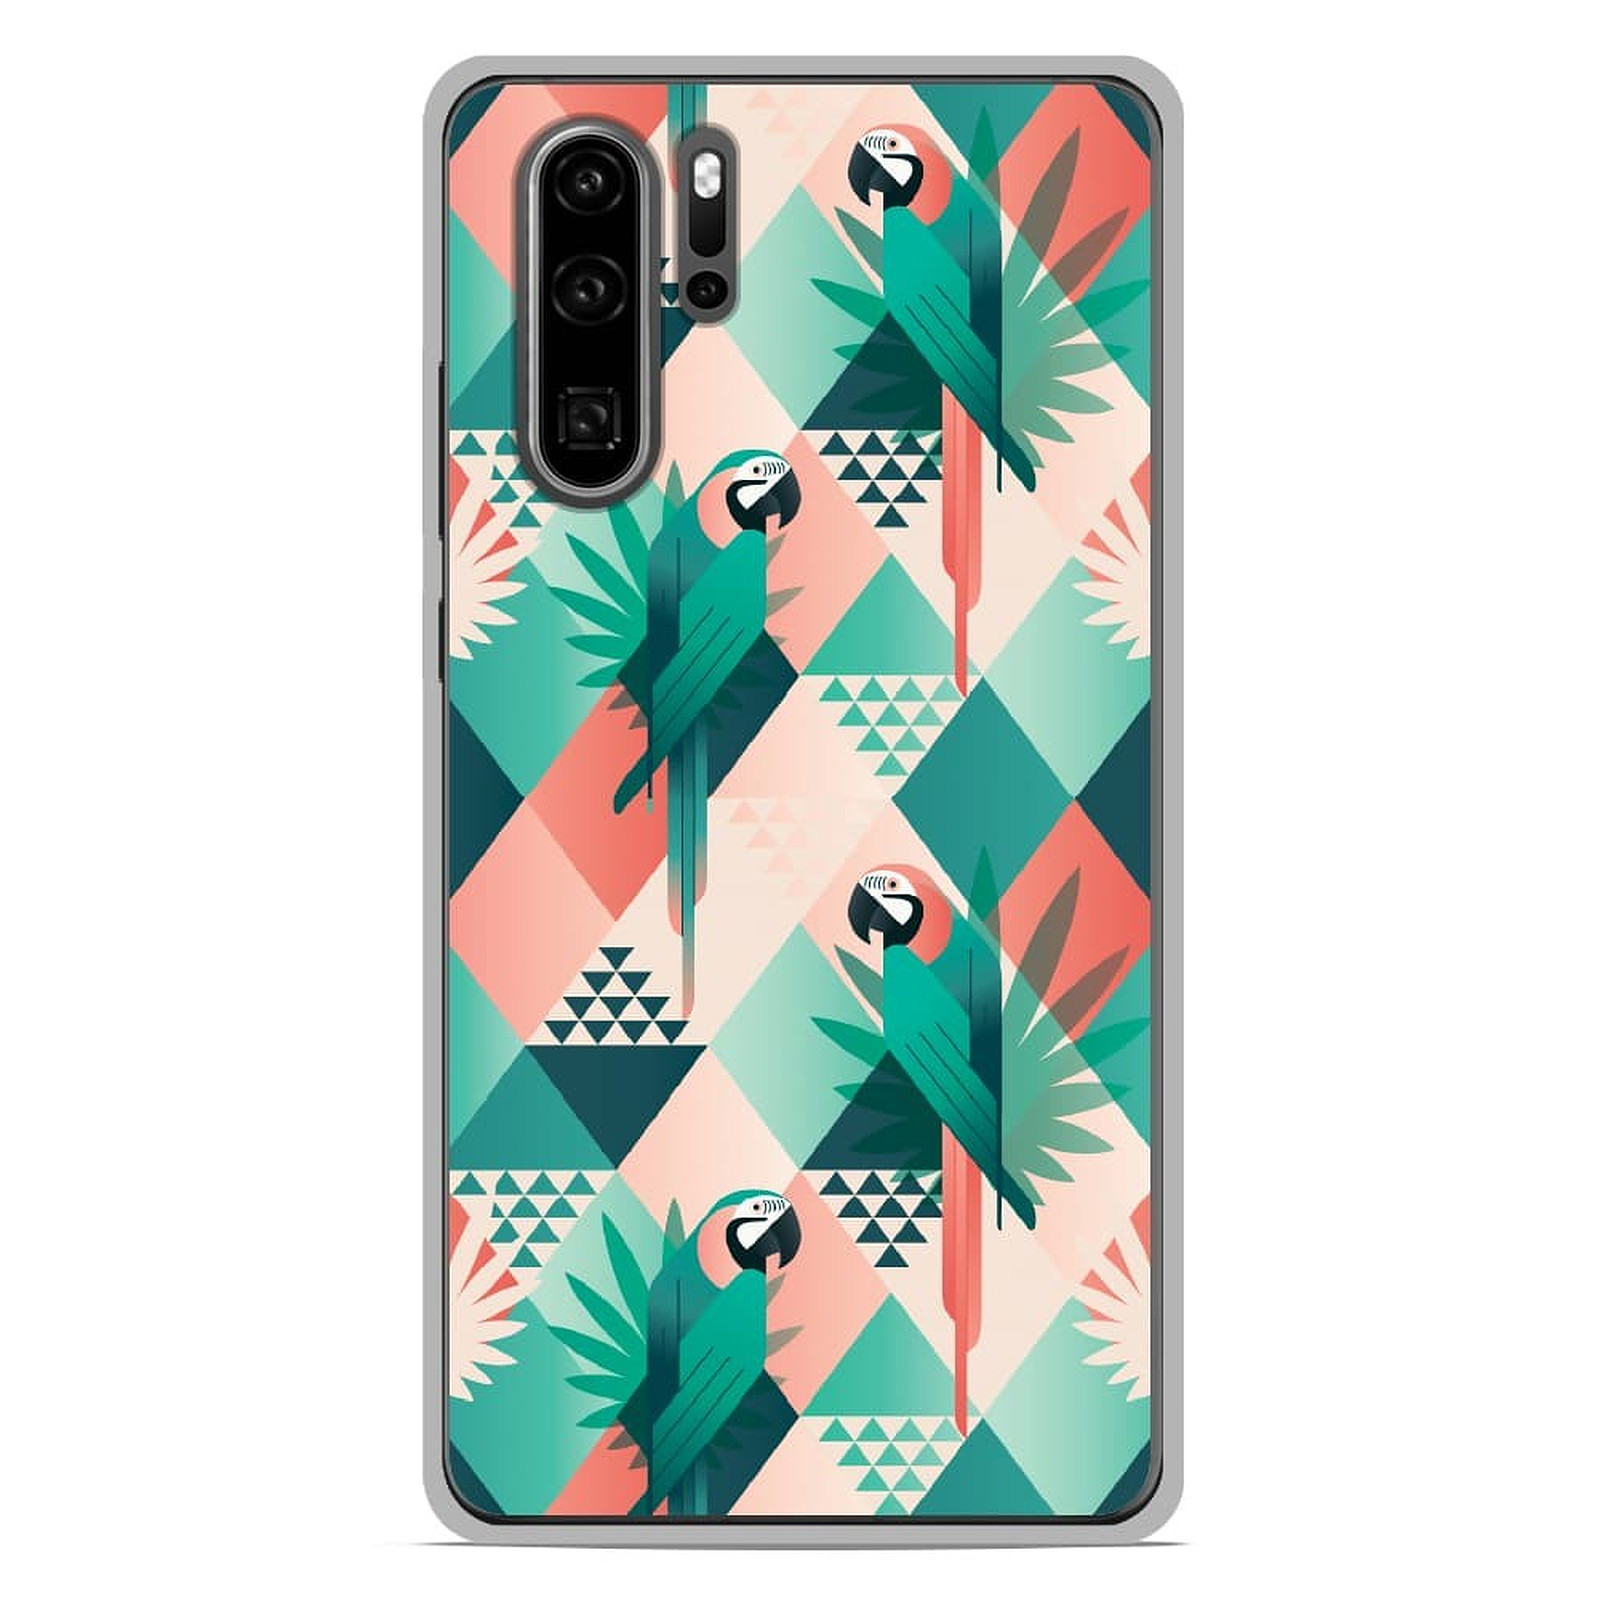 1001 Coques Coque silicone gel Huawei P30 Pro motif Perroquet ge´ome´trique - Coque telephone 1001Coques